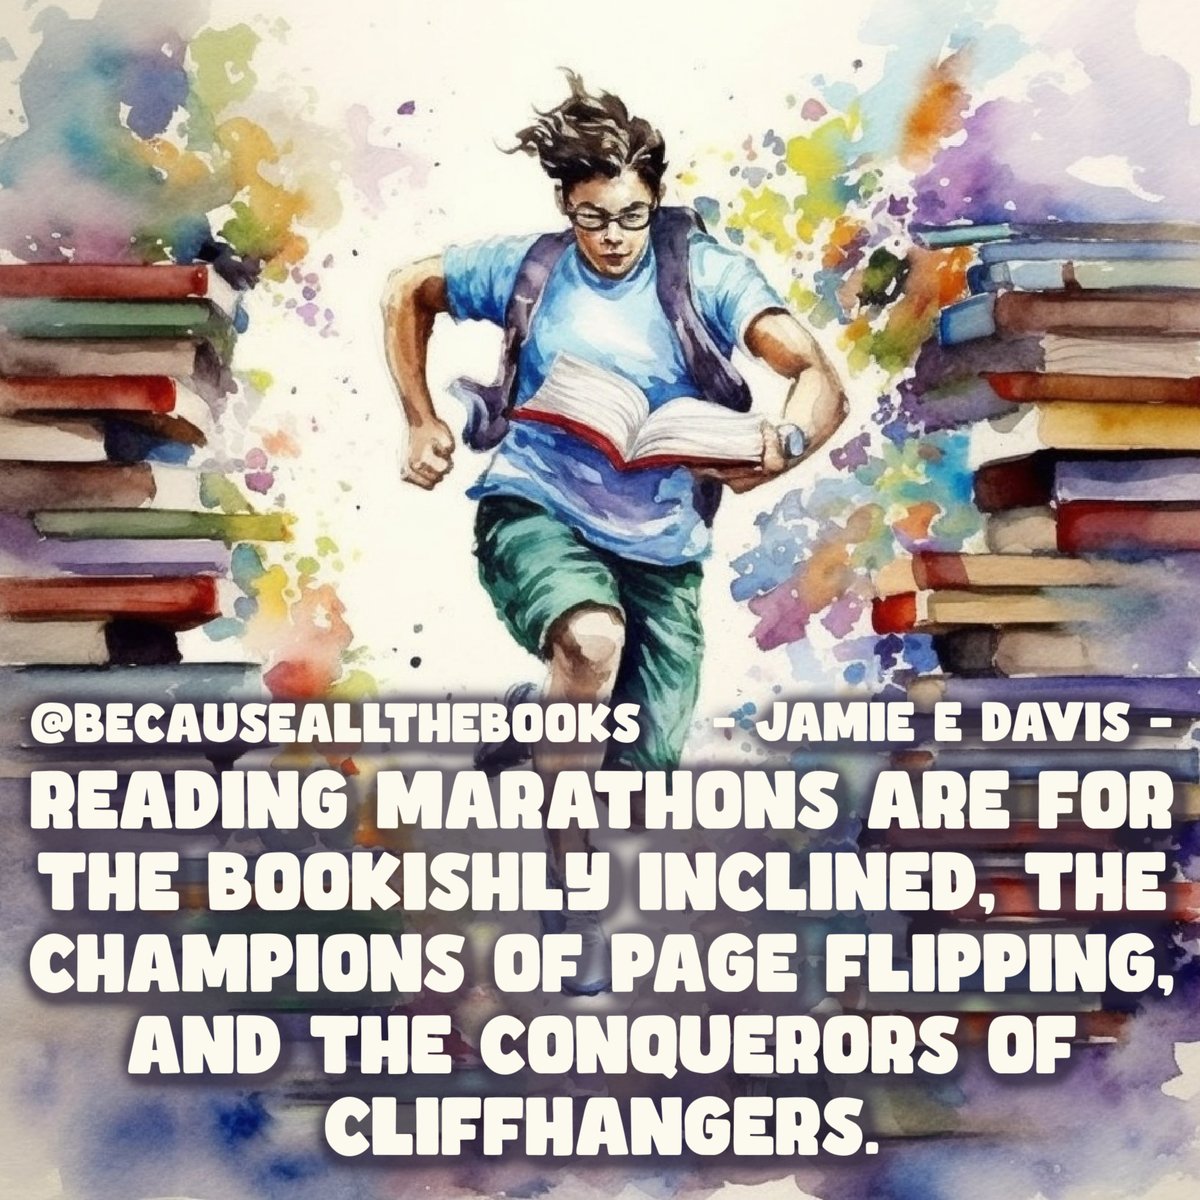 Lace up, ladies and gentlemen...it's time to sprint!

#BecauseAllTheBooks #BingeReading #TimeToRead #ReadingTime📖